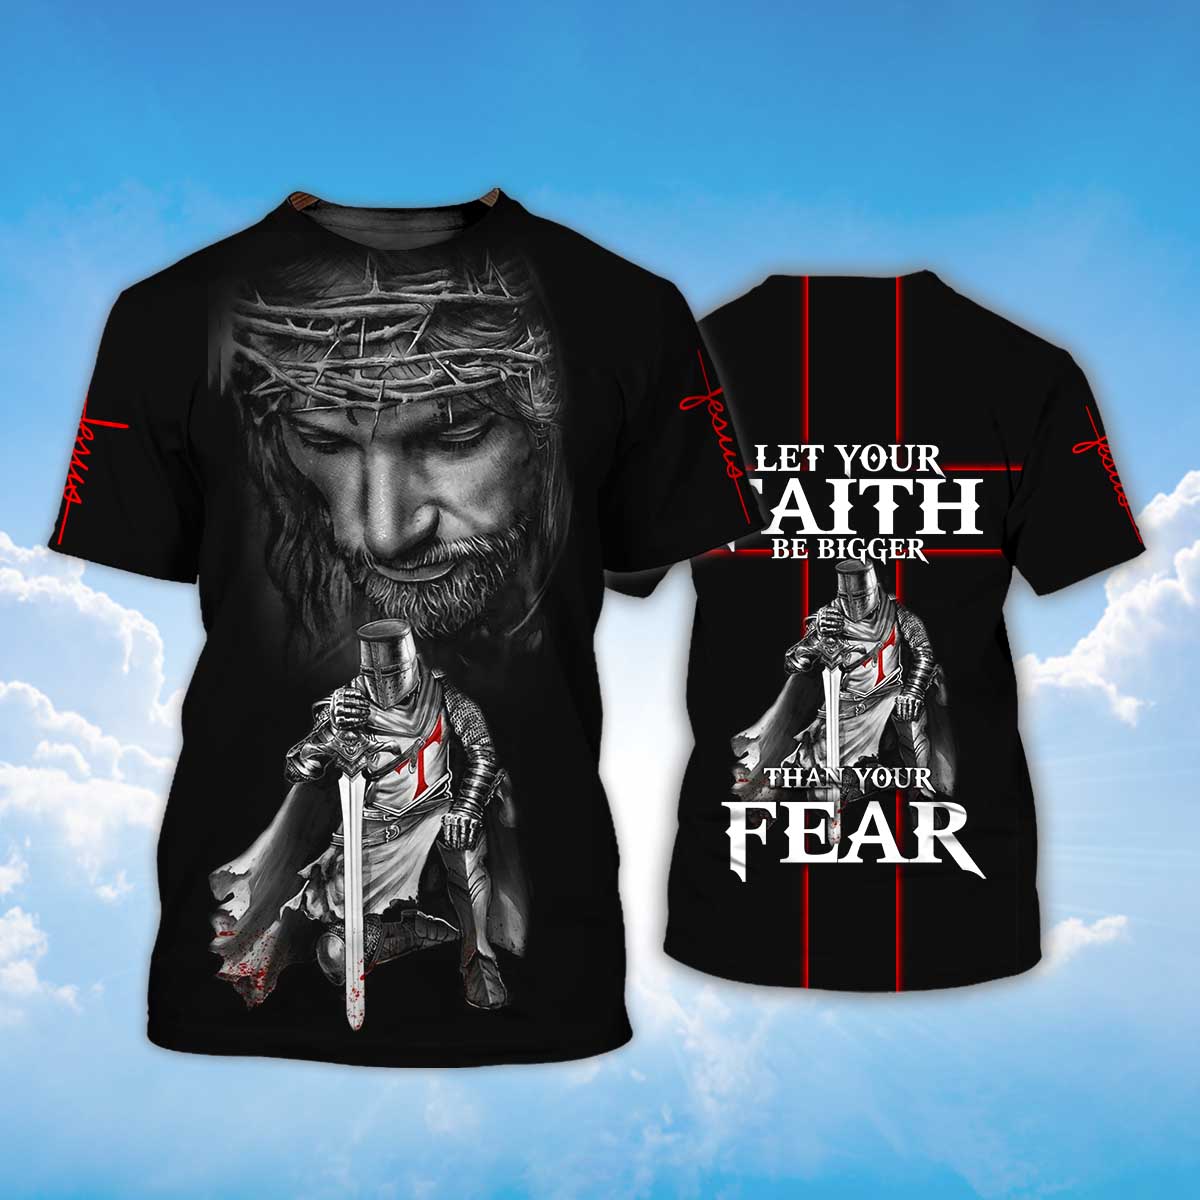 Let Your Faith Be Bigger Than Your Fear Tshirt/ Knight Christian Jesus Tshirt